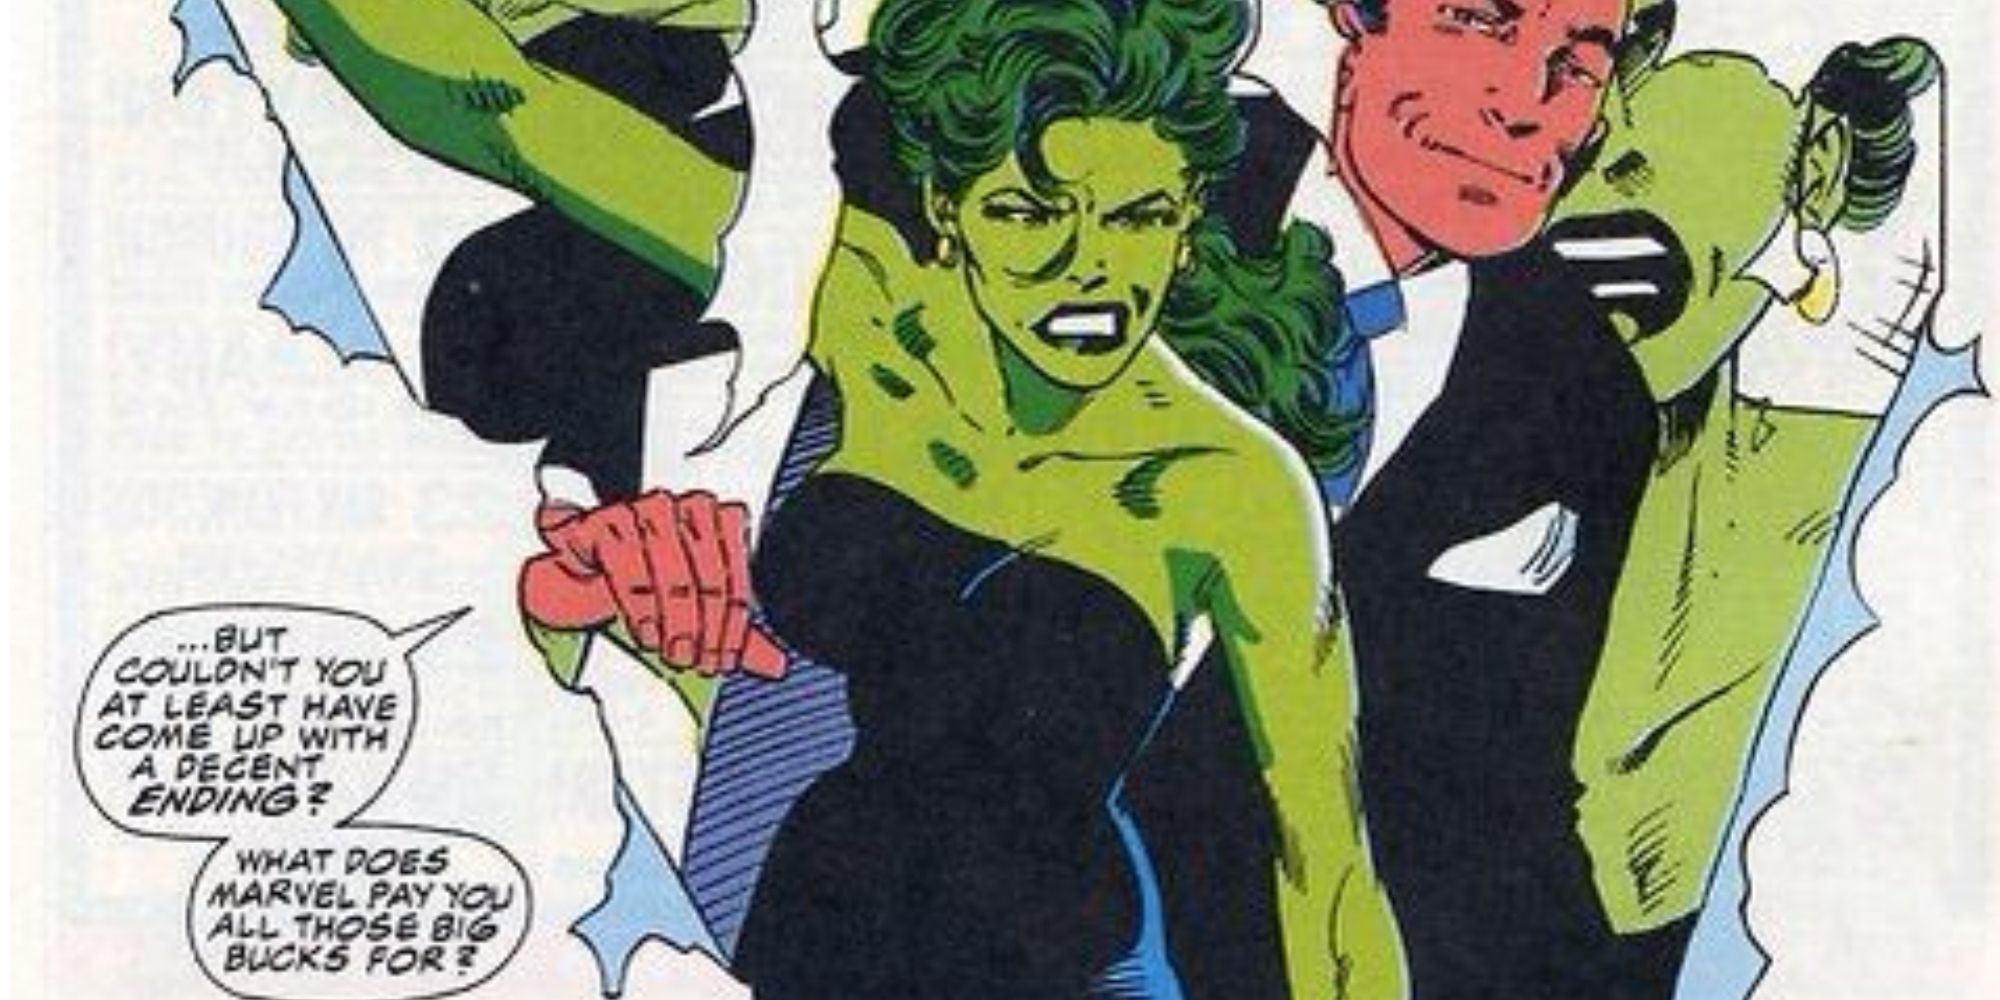 She-Hulk tears through a comic page in Marvel Comics.